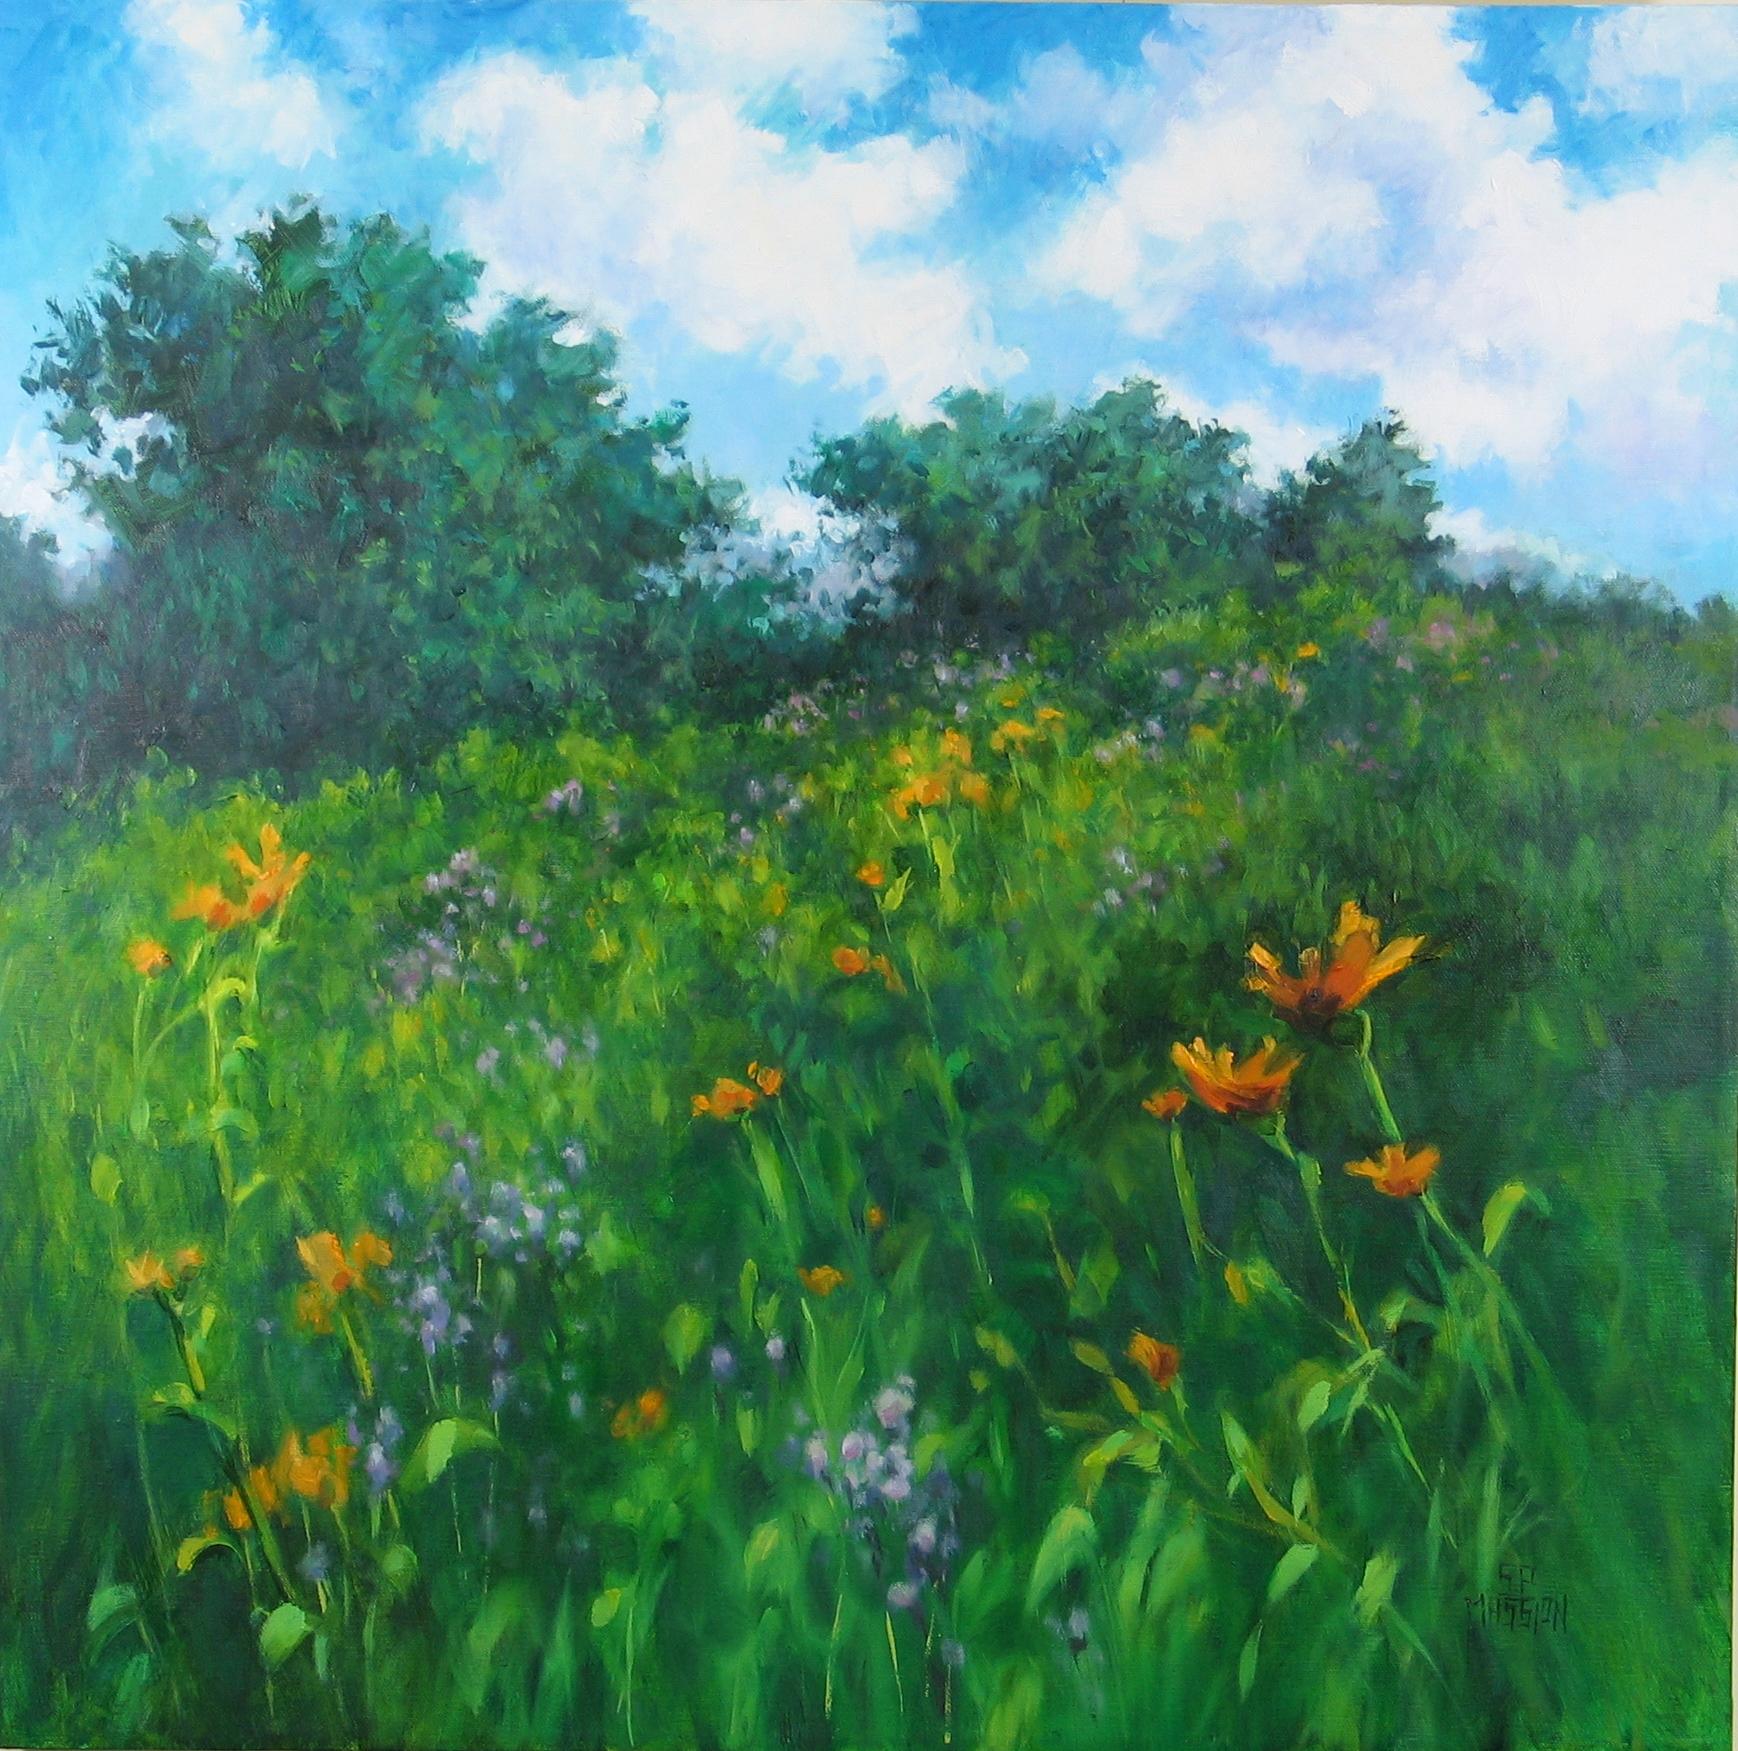 Suzanne Massion Landscape Painting - Upland Meadow in Bloom